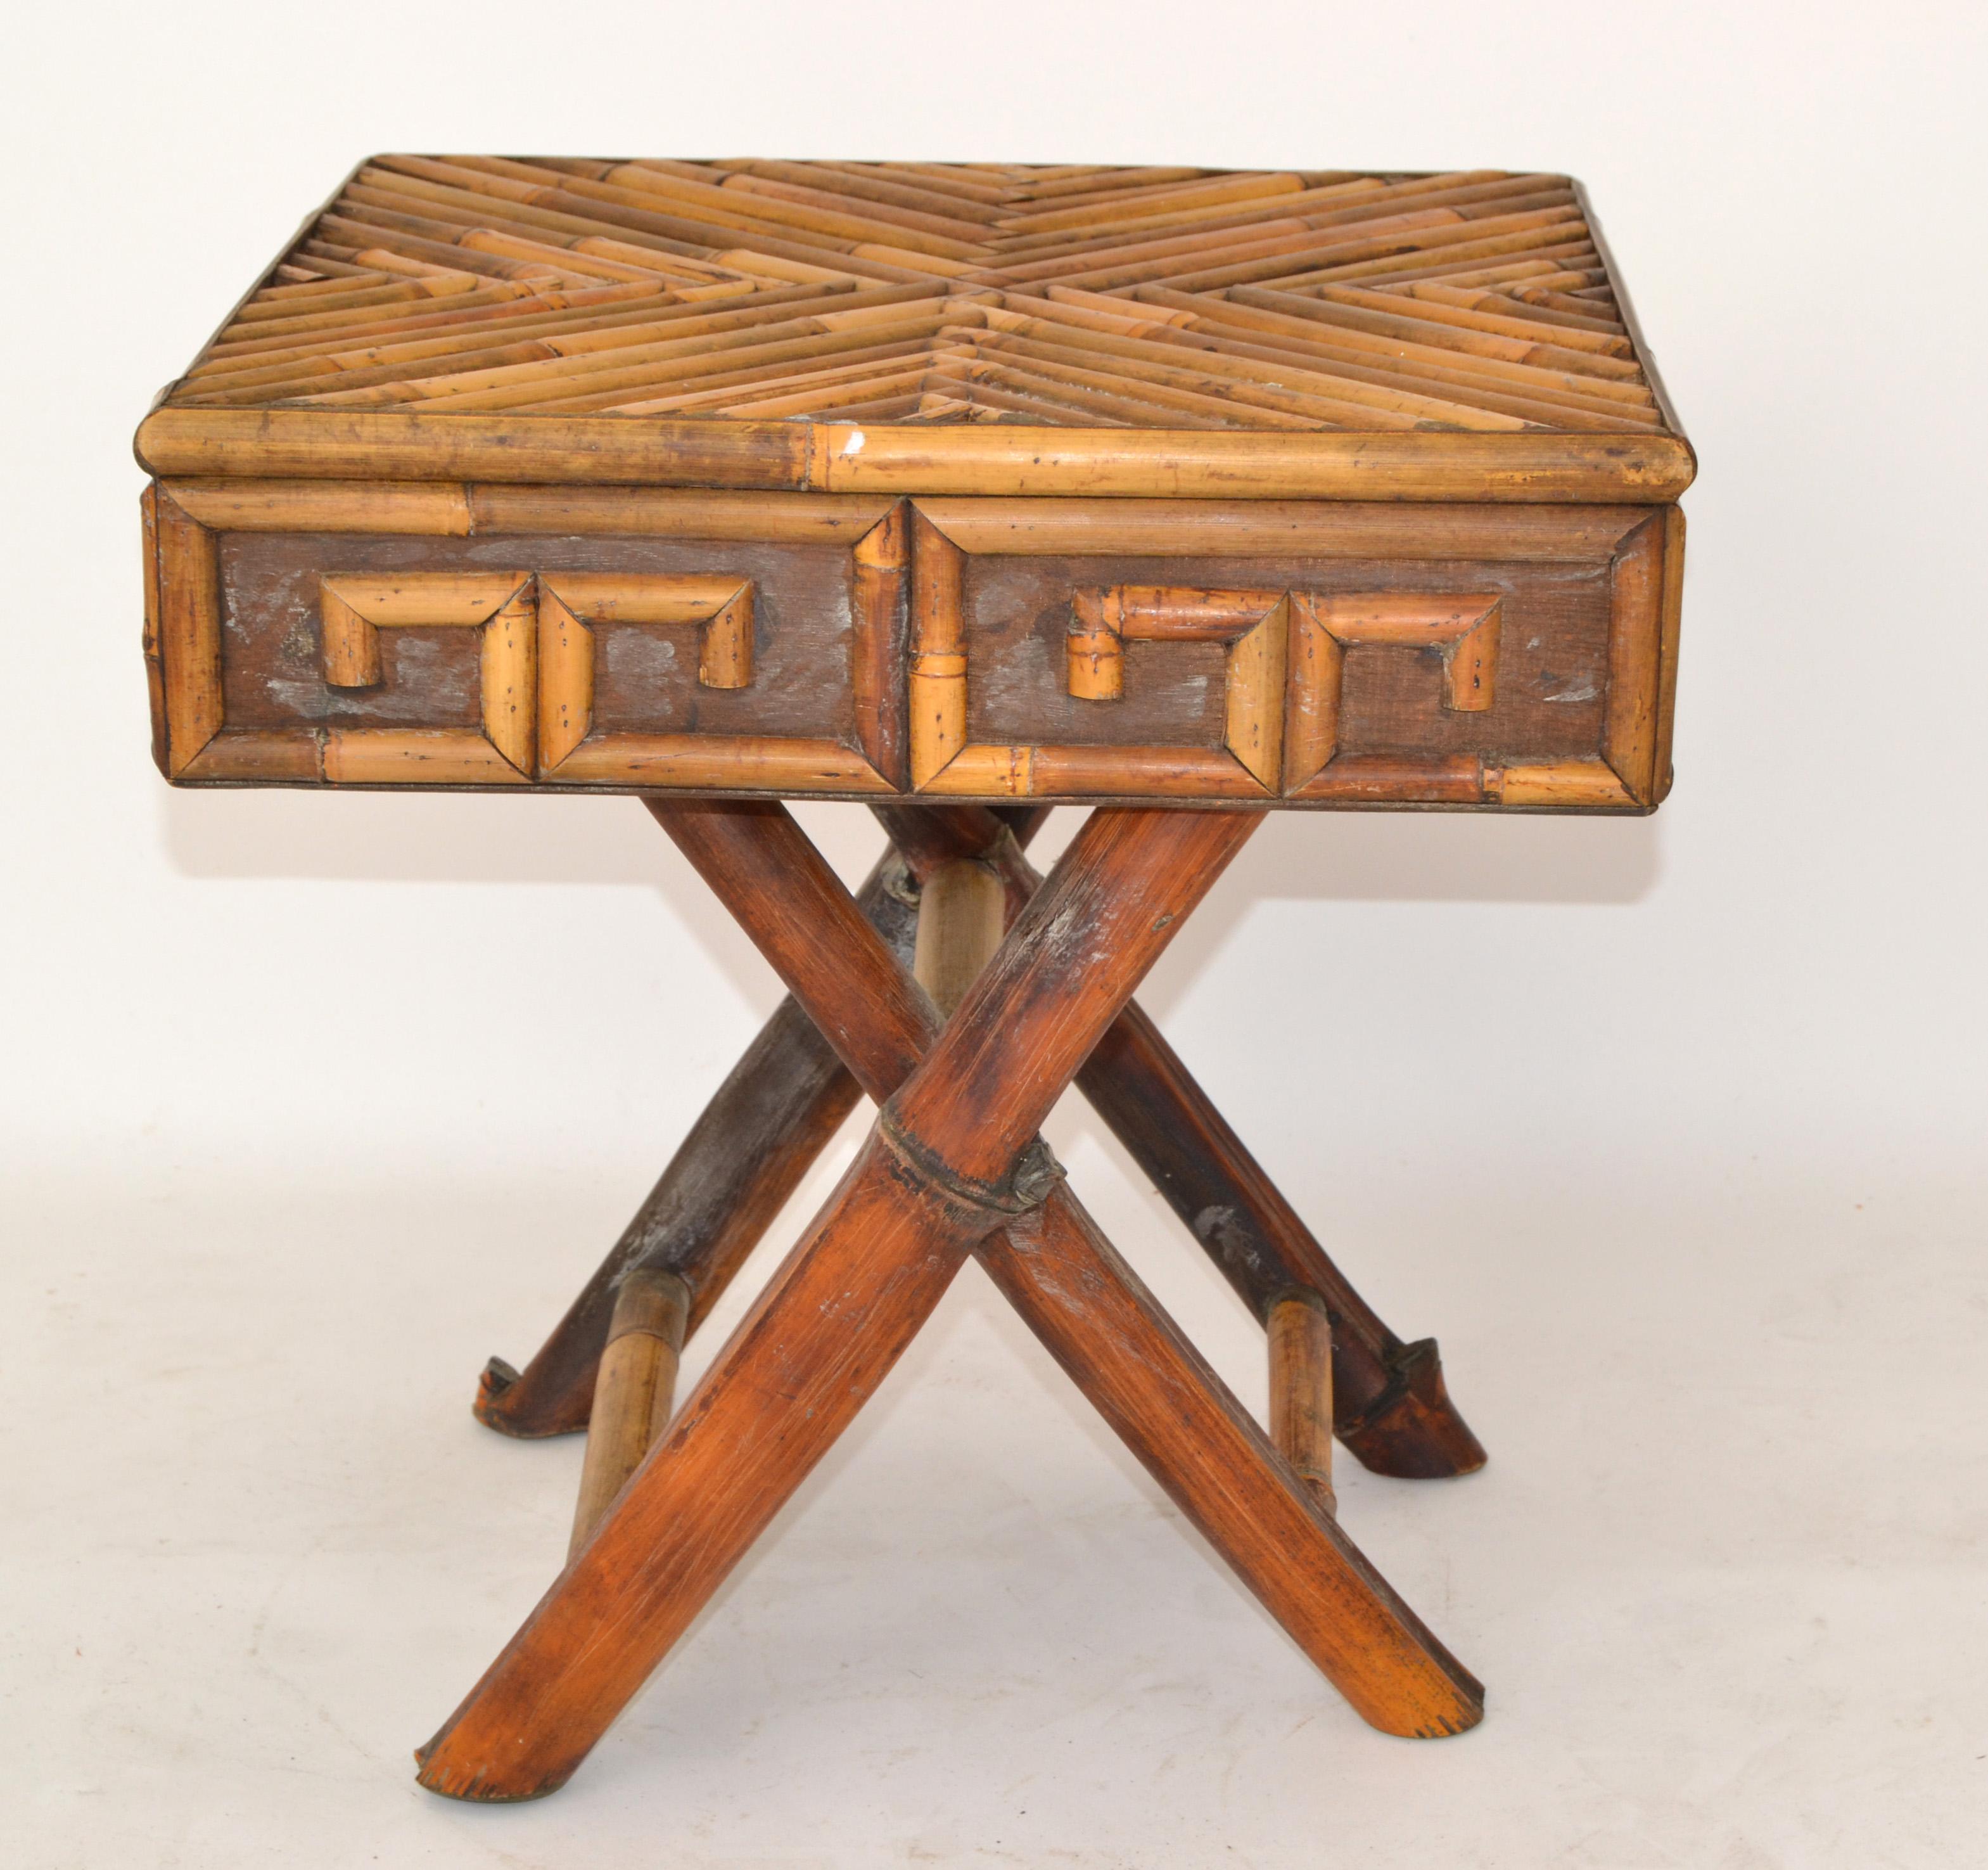 1960s Single Bohemian style Mid-Century Modern handcrafted bamboo and cane square folding Side, Drink or End Table.
Strands of Bamboo in geometric shapes on Top and the Apron is decorated in Bambo Greek Key Pattern.
The folding Table is sturdy and